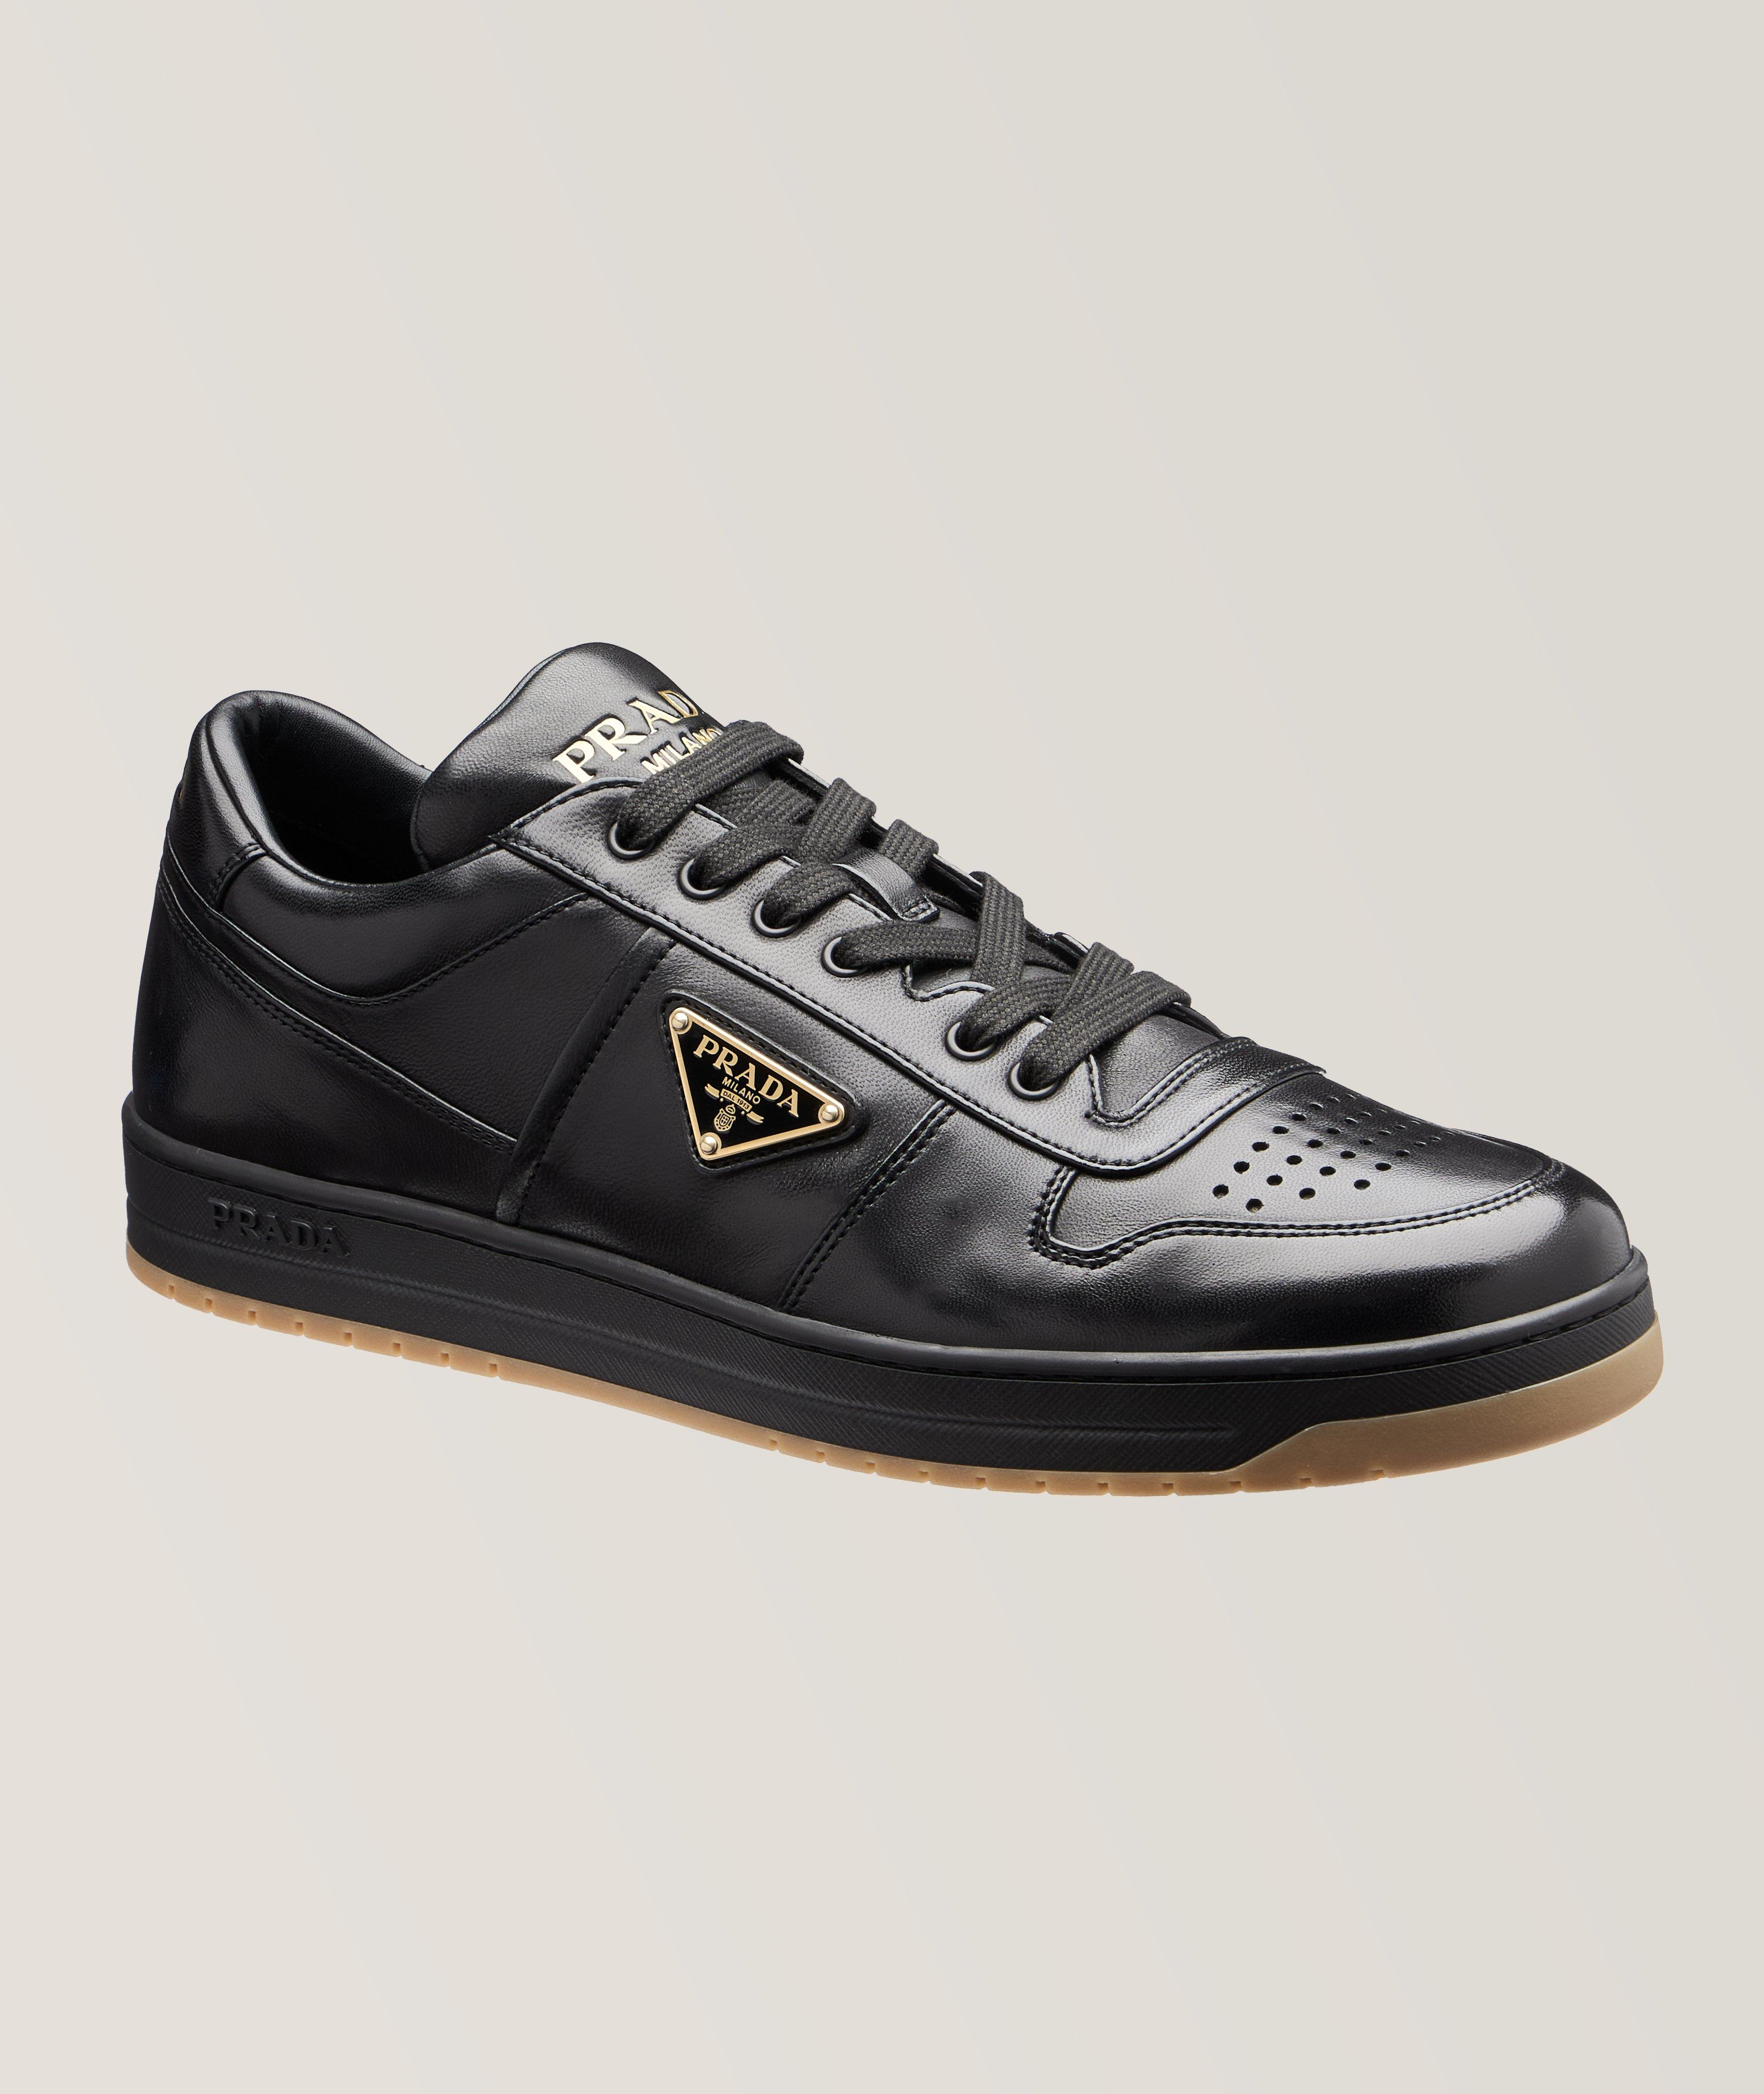 Downtown Nappa Leather Sneakers  image 0